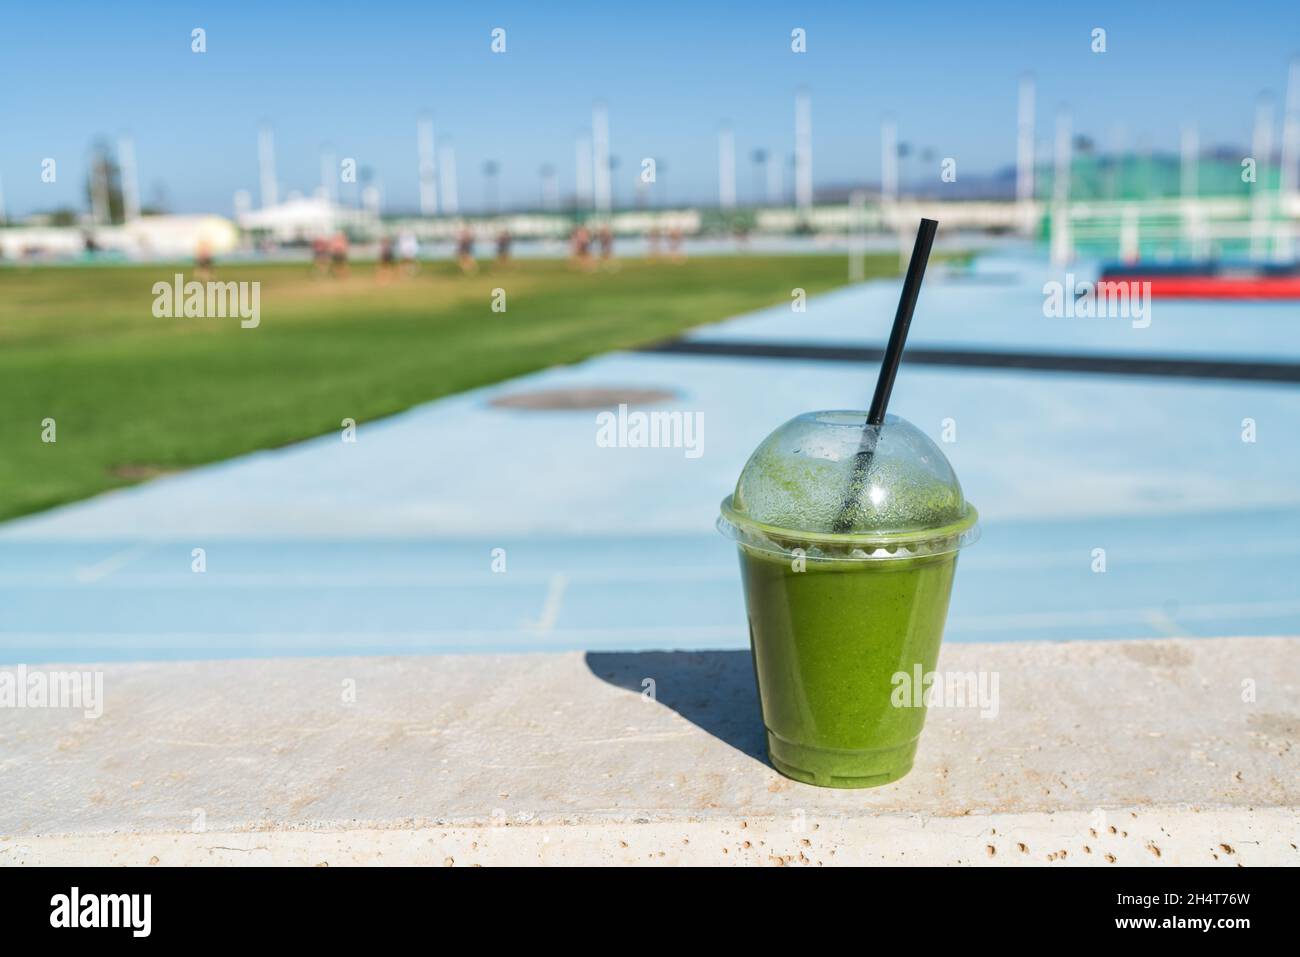 Green smoothie detox juice drink at outdoor sports stadium for runners athletes on blue running track. Healthy diet protein shake for sport people. Stock Photo